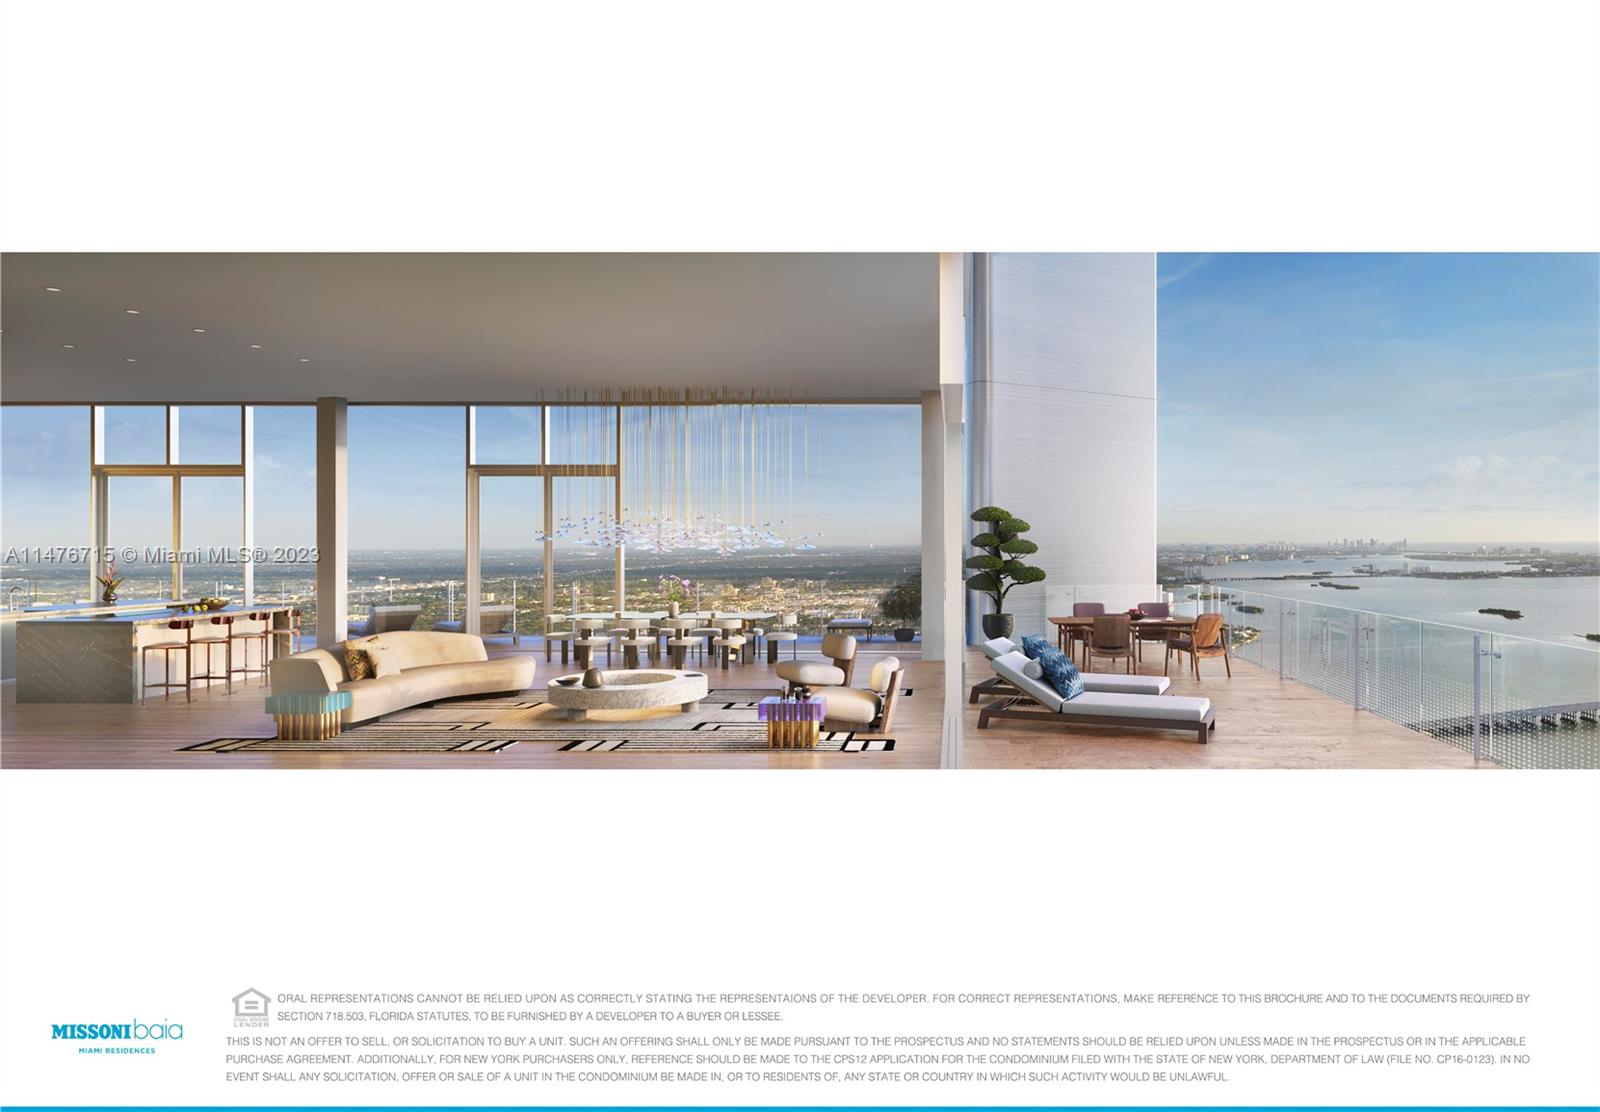 Designer ready Penthouse at desires Missoni. 3587 sqft under AC + incredible 2122 sqft terrace, incredible views of Biscayne Bay and Miami Skyline